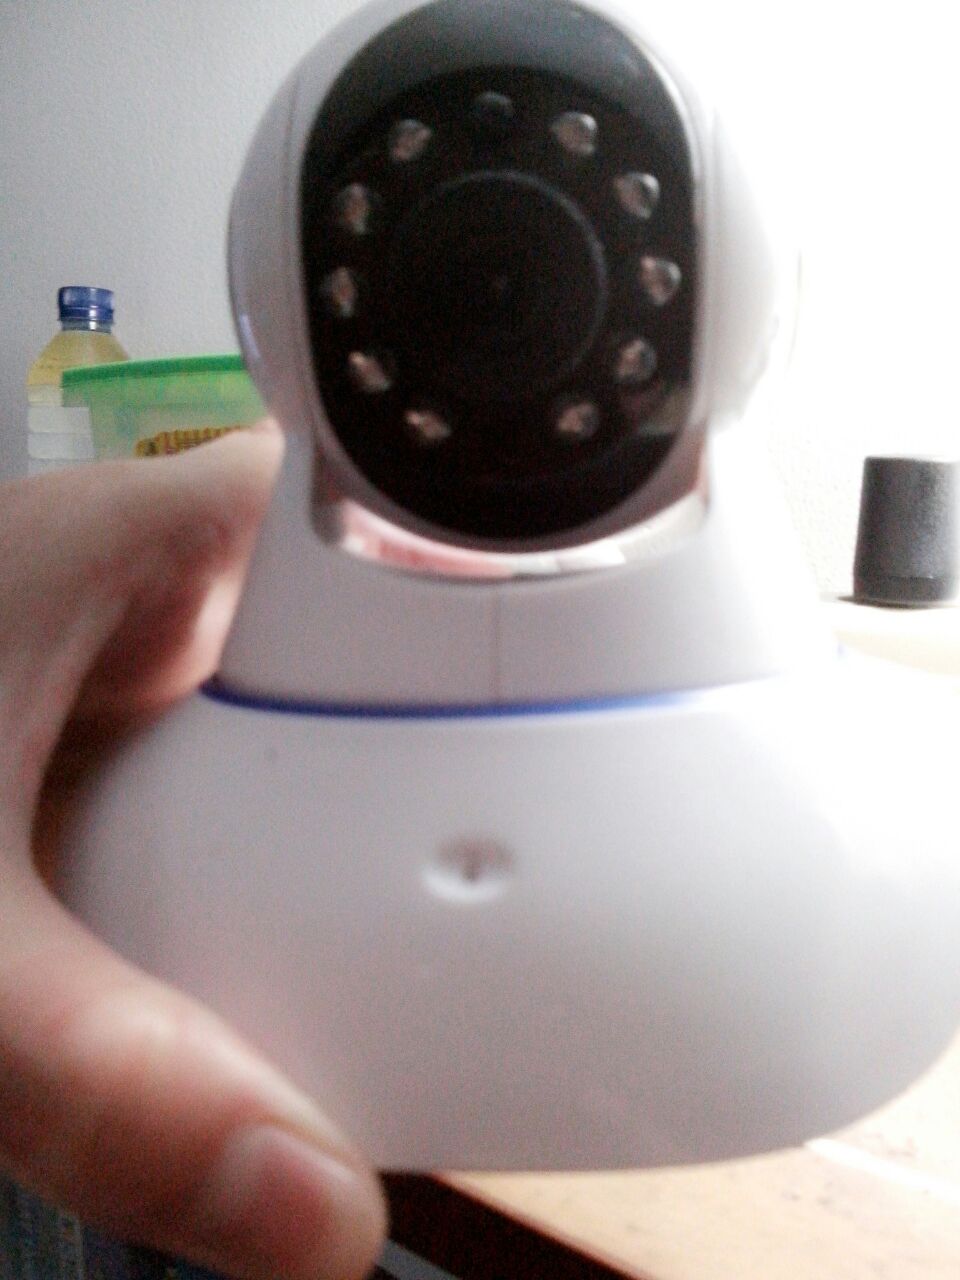 Our Fisrt IP Camera “e-ROBOT” by Unifore